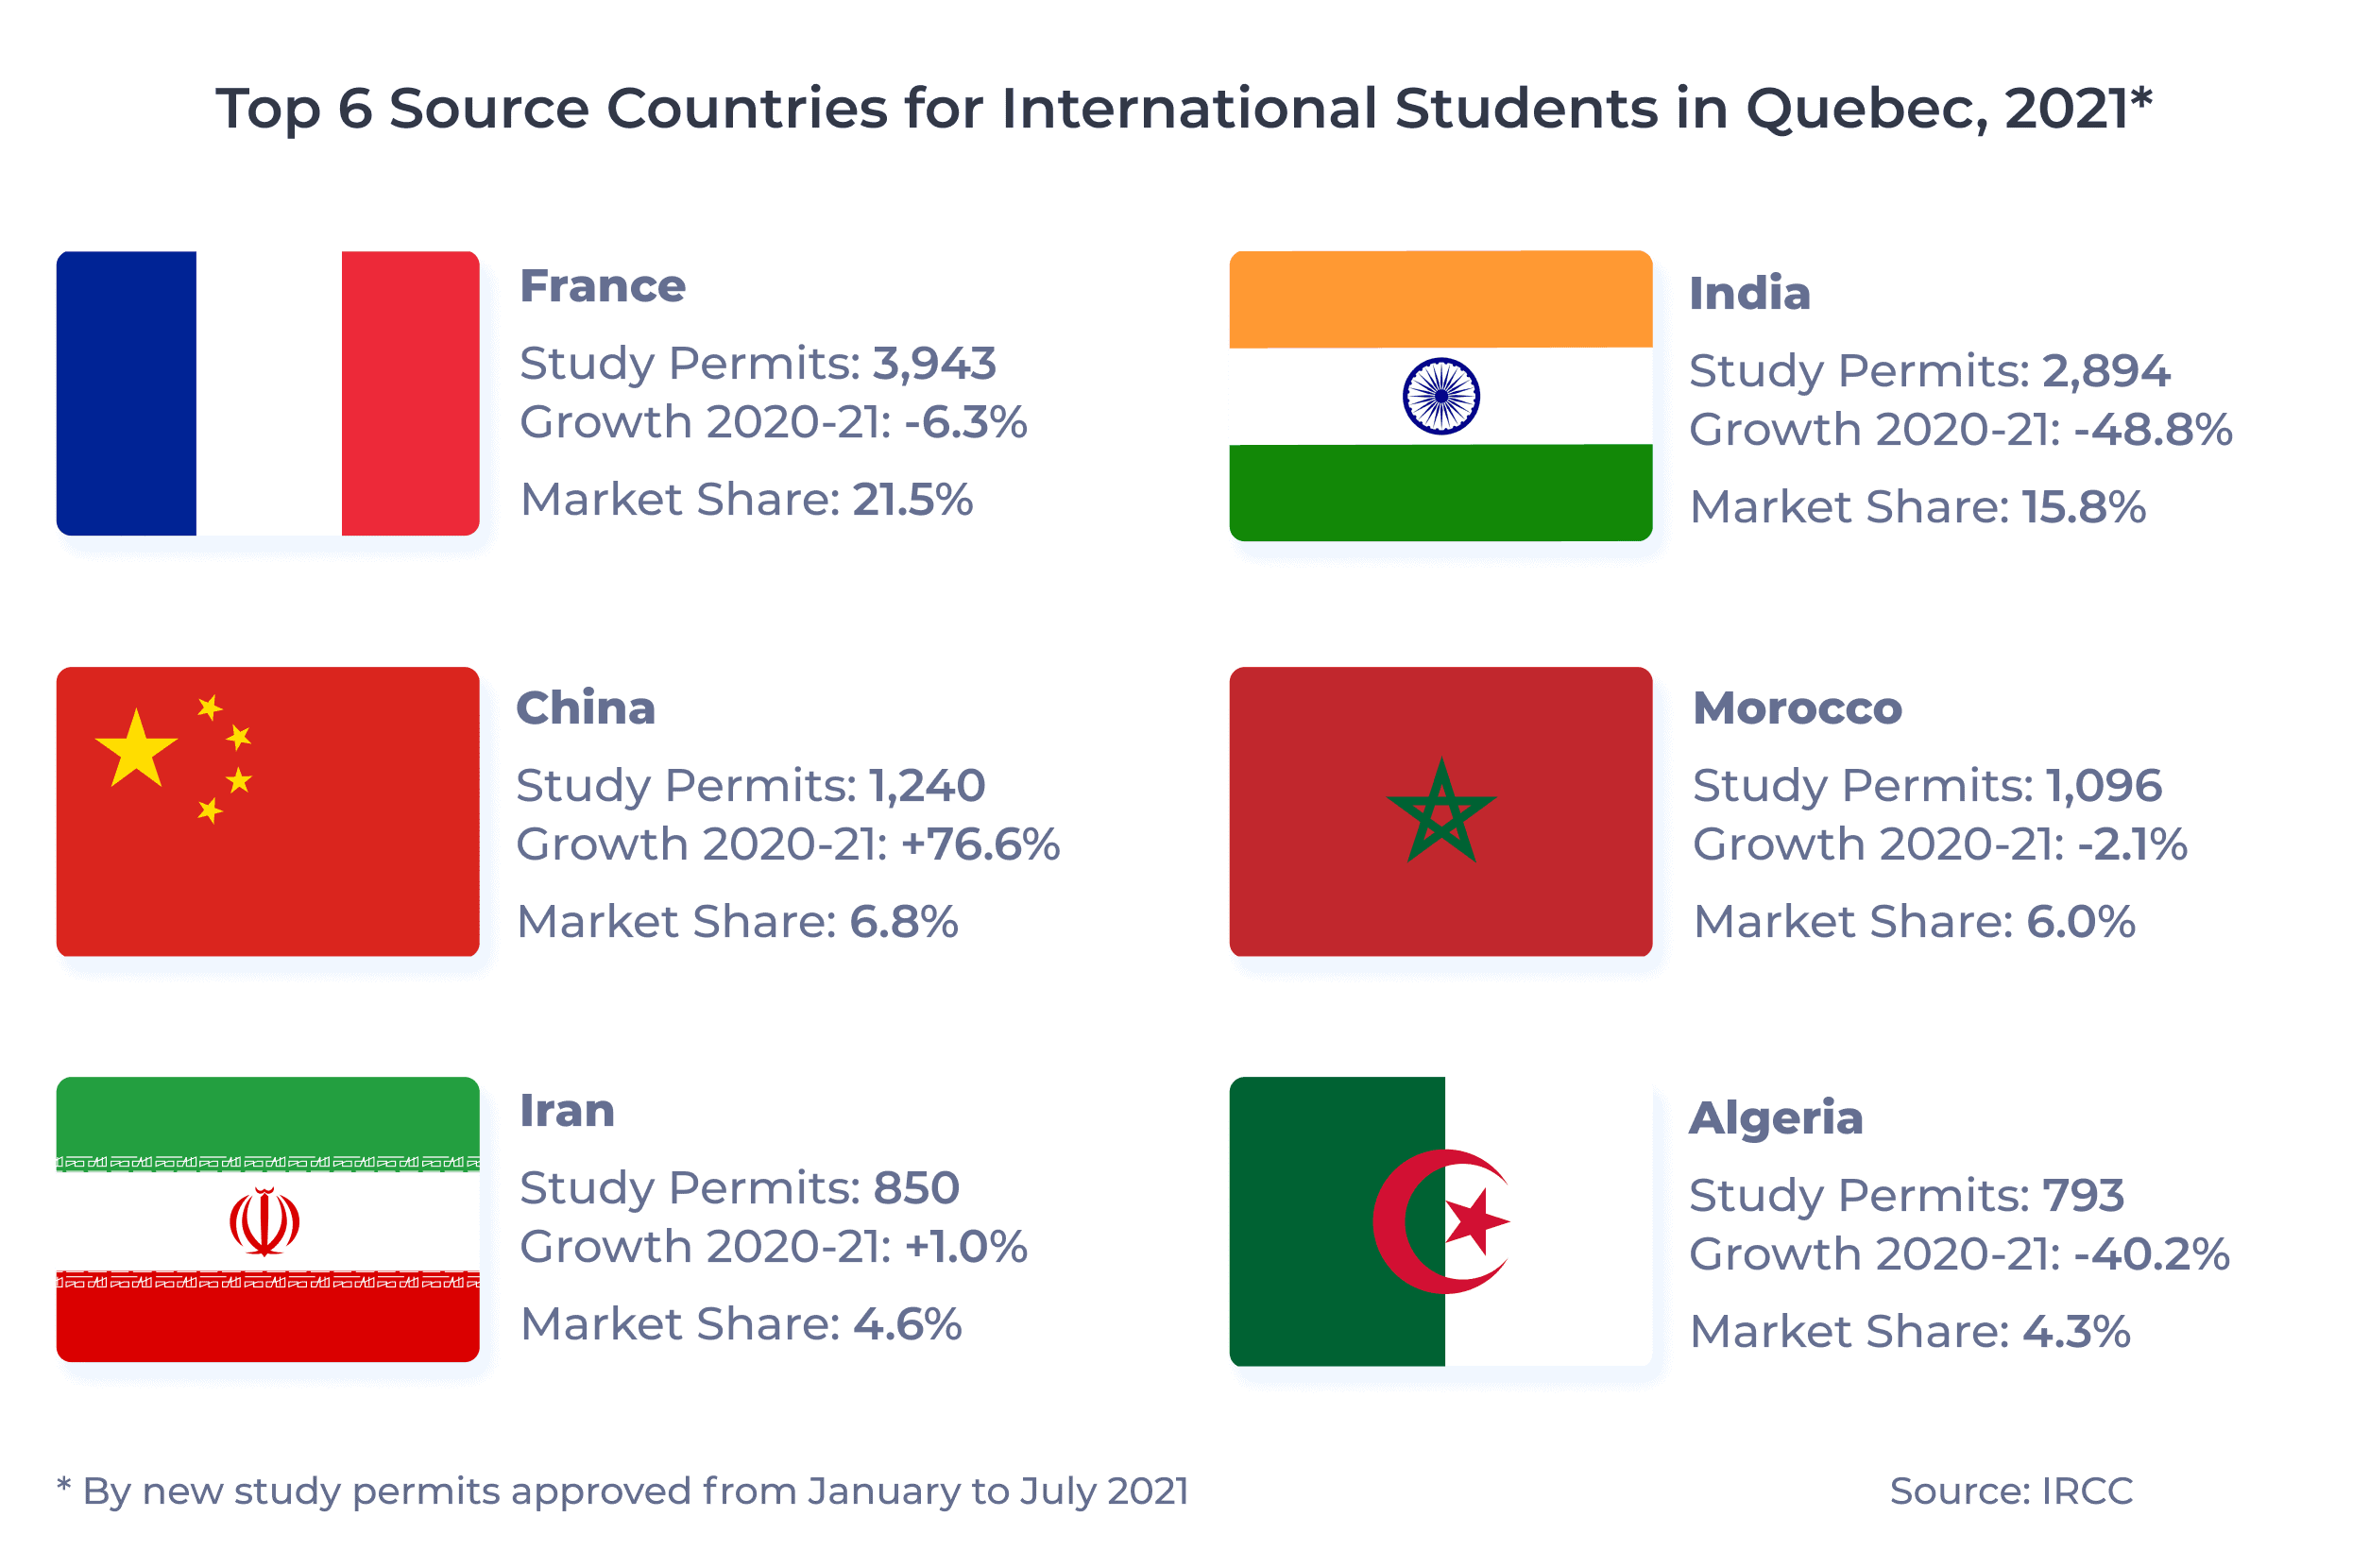 Top 6 Source Countries for International Students in Quebec, 2021